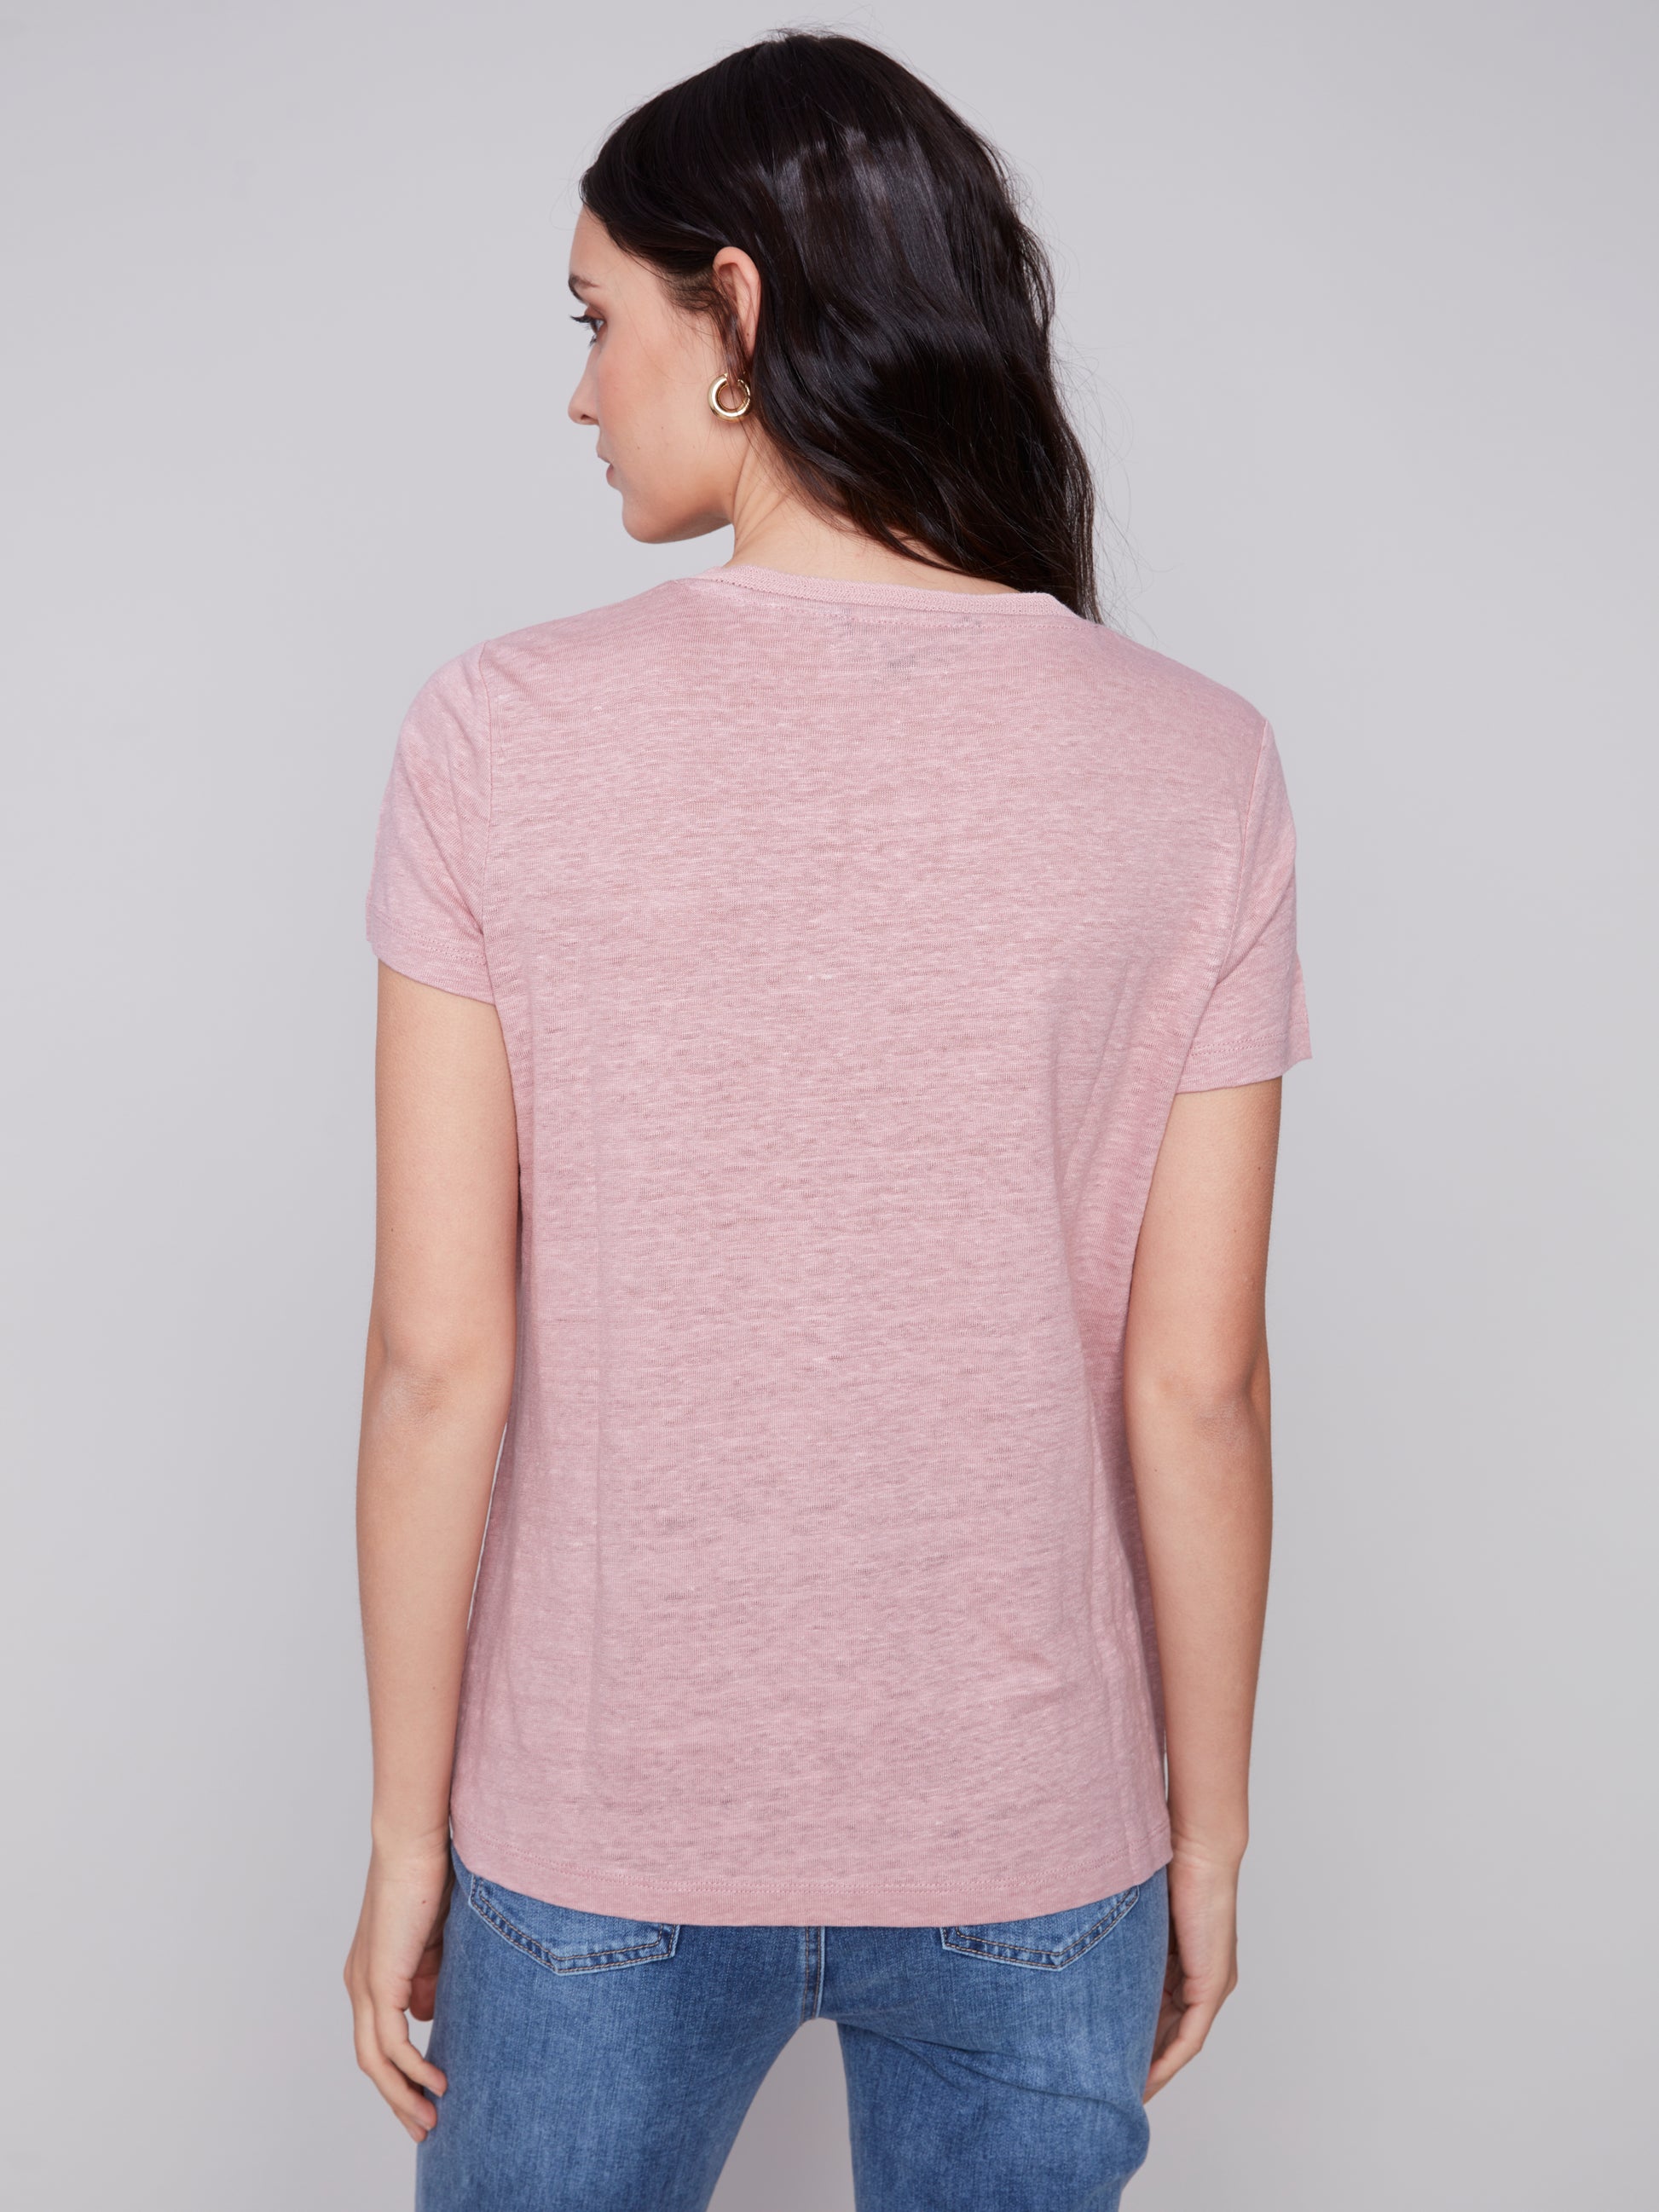 The model is wearing a pink Charlie B Linen V Neck T-Shirt, showcasing its versatility.